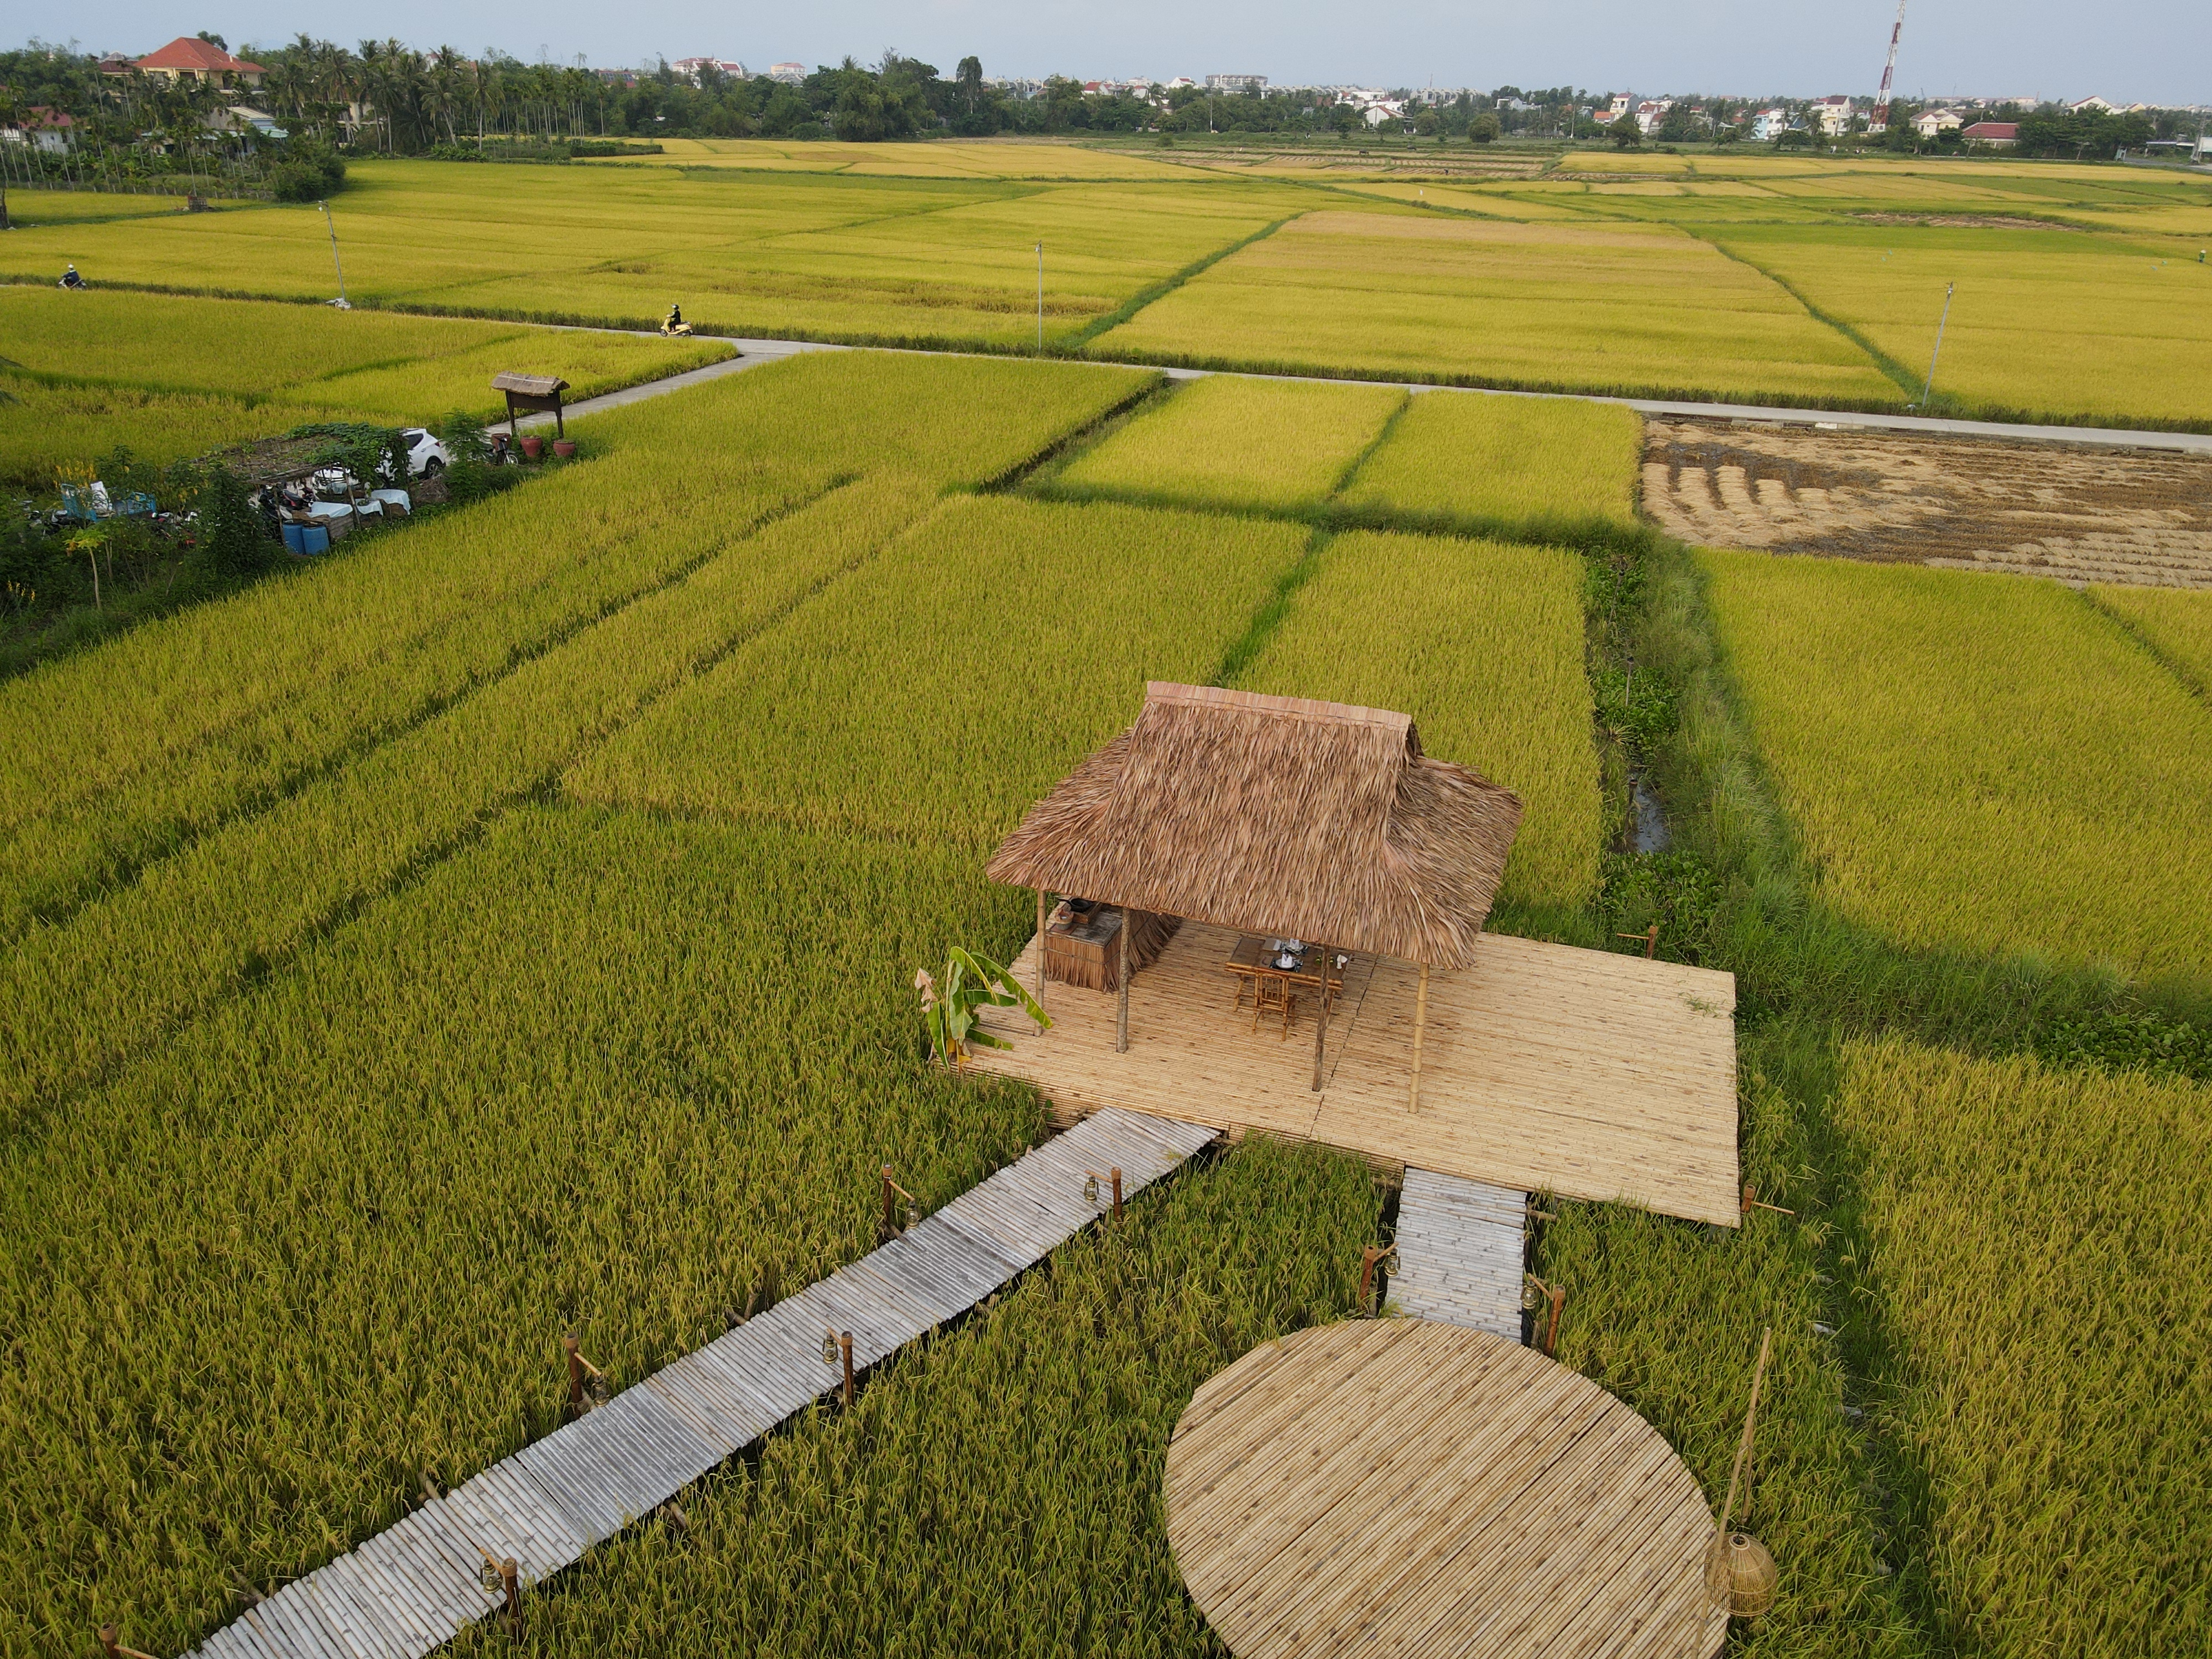 A ‘RESTAURANT WITHOUT WALLS’ IN VIETNAM